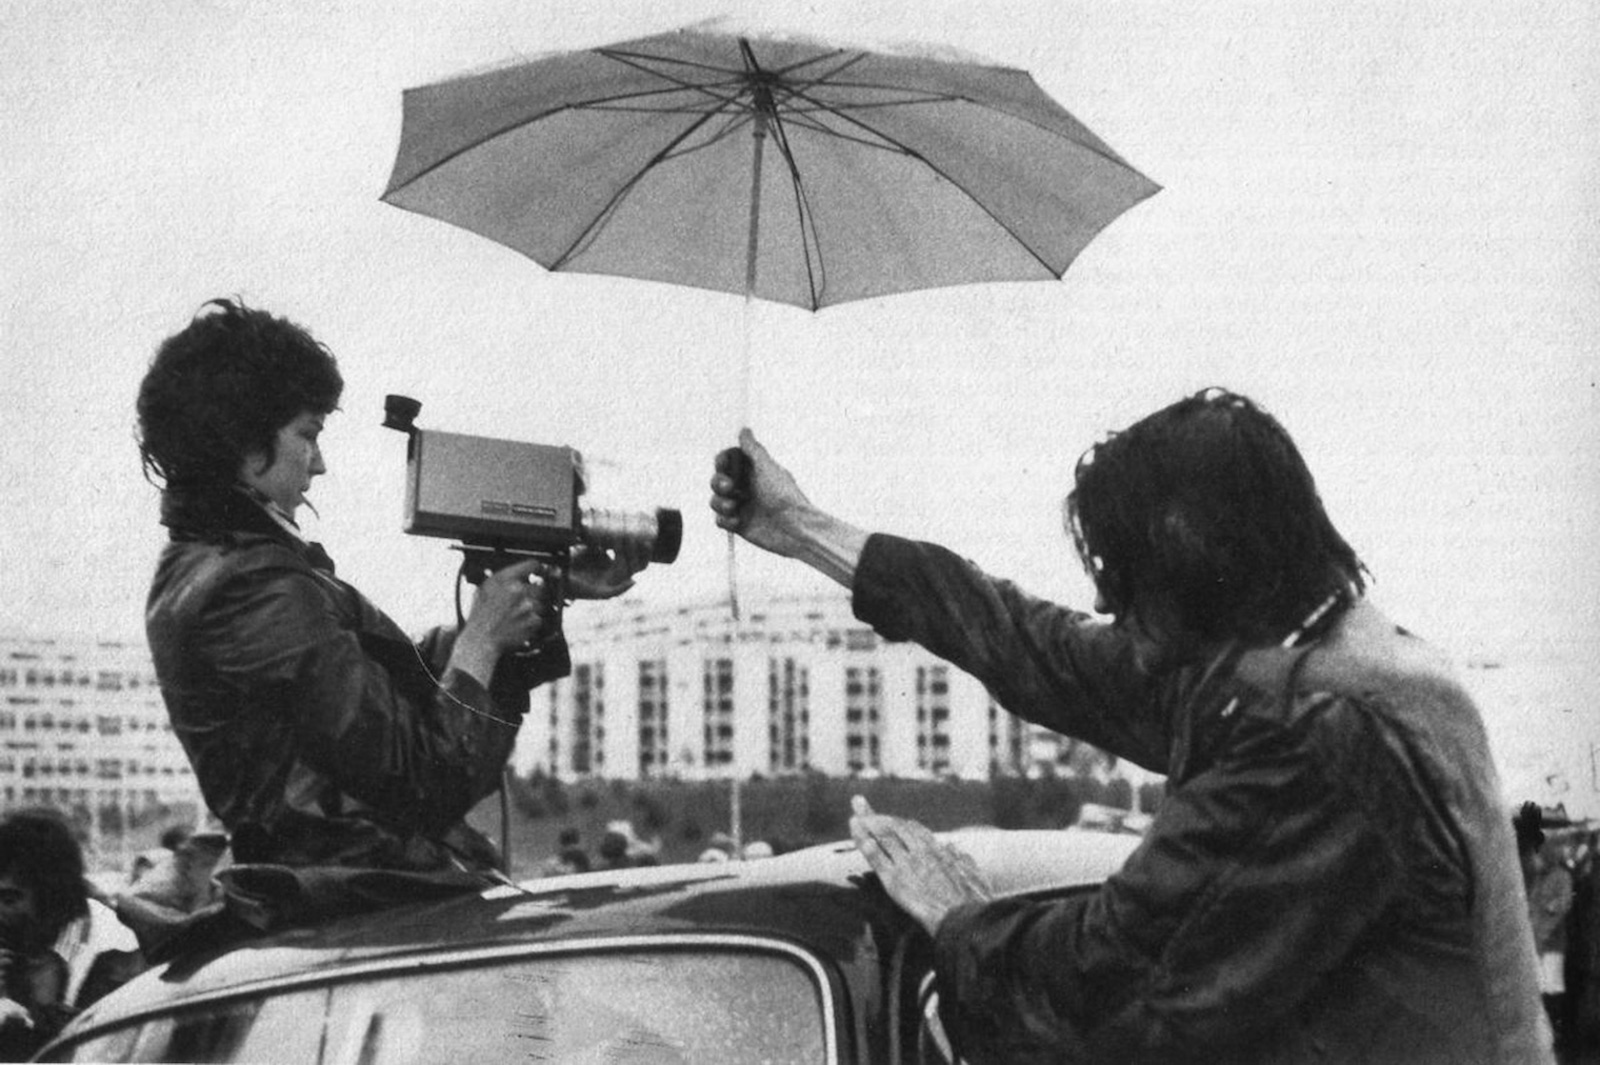 a woman filming through the sunroof of a car while someone holds an umbrella over them